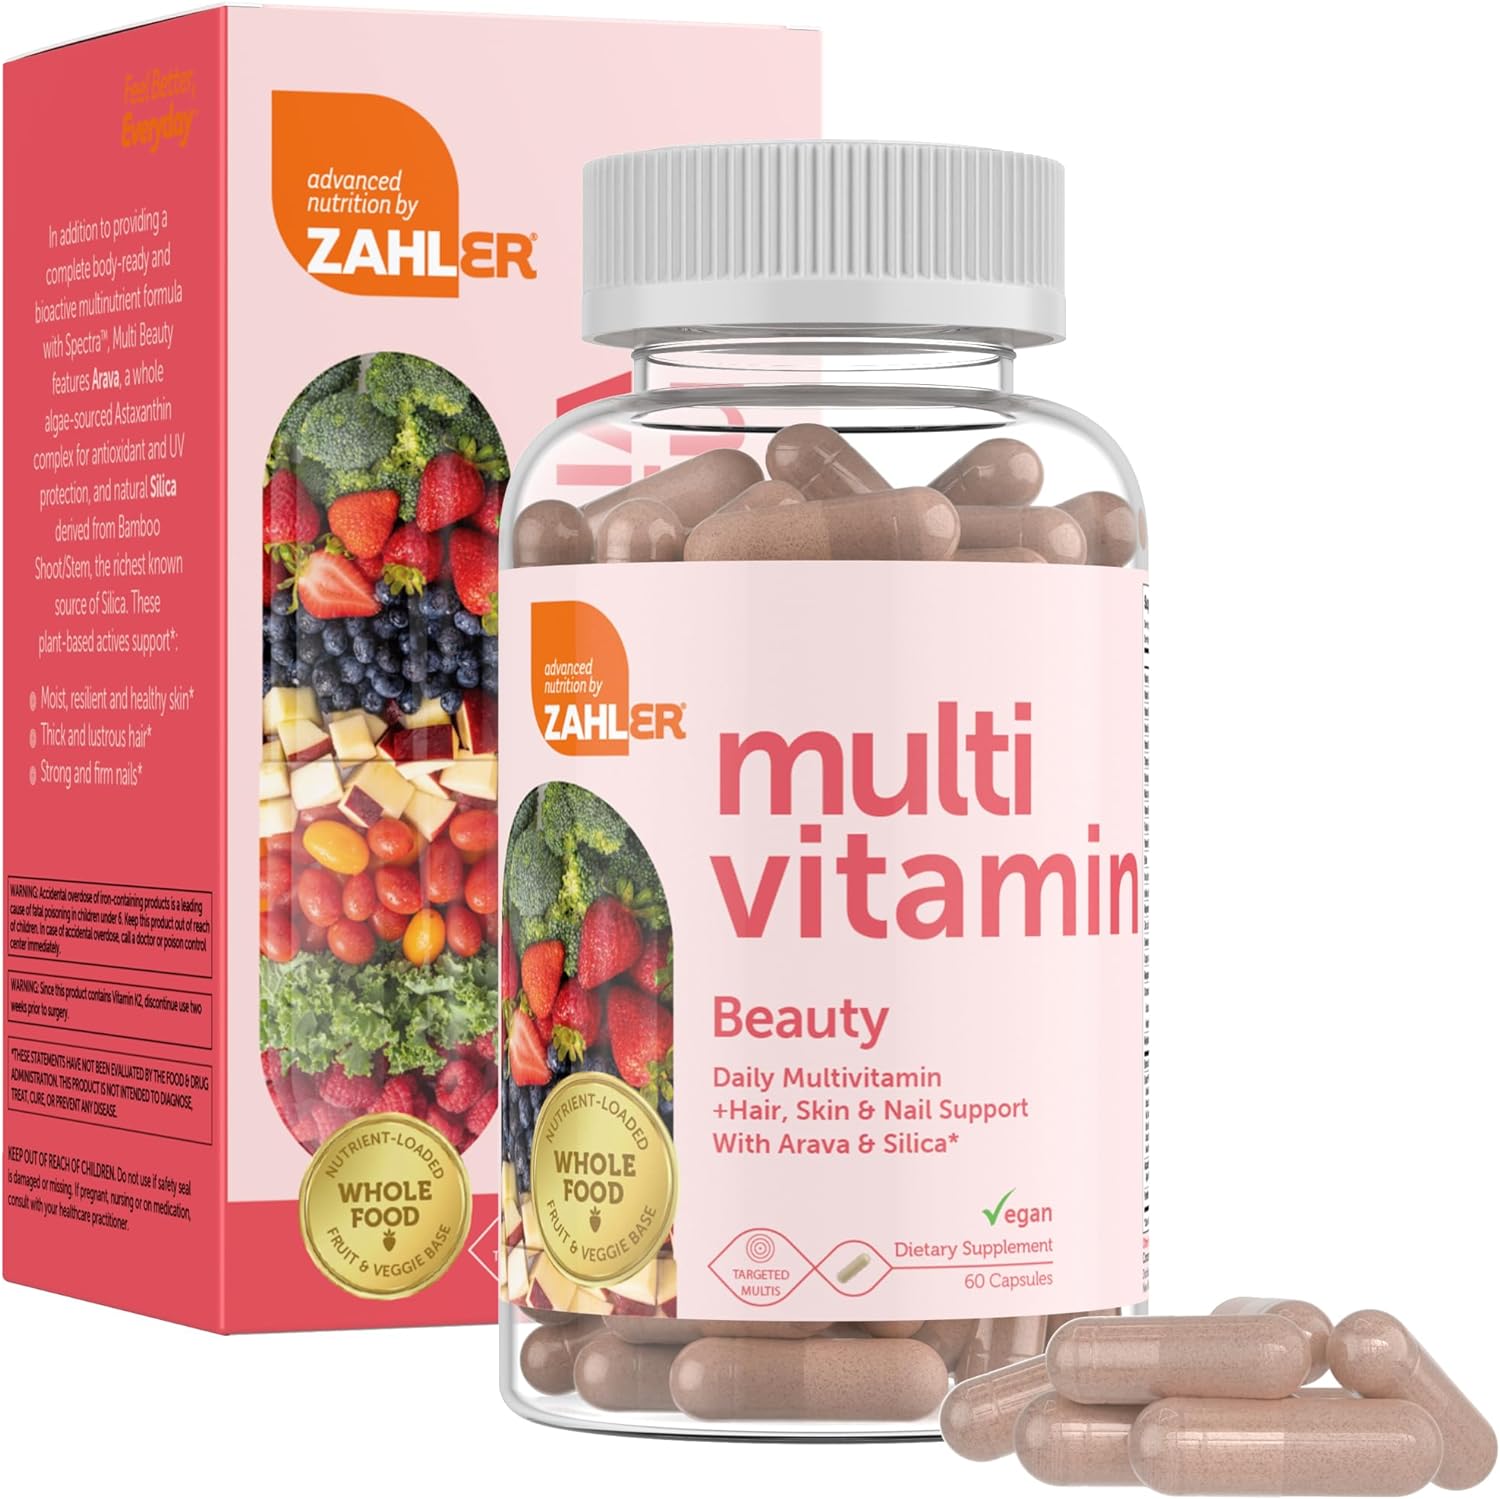 Zahler Multivitamin Beauty, Daily Multivitamin +Skin Hair and Nails Support, Multivitamin for Women and Men with Iron, Certified Kosher, 60 Capsules